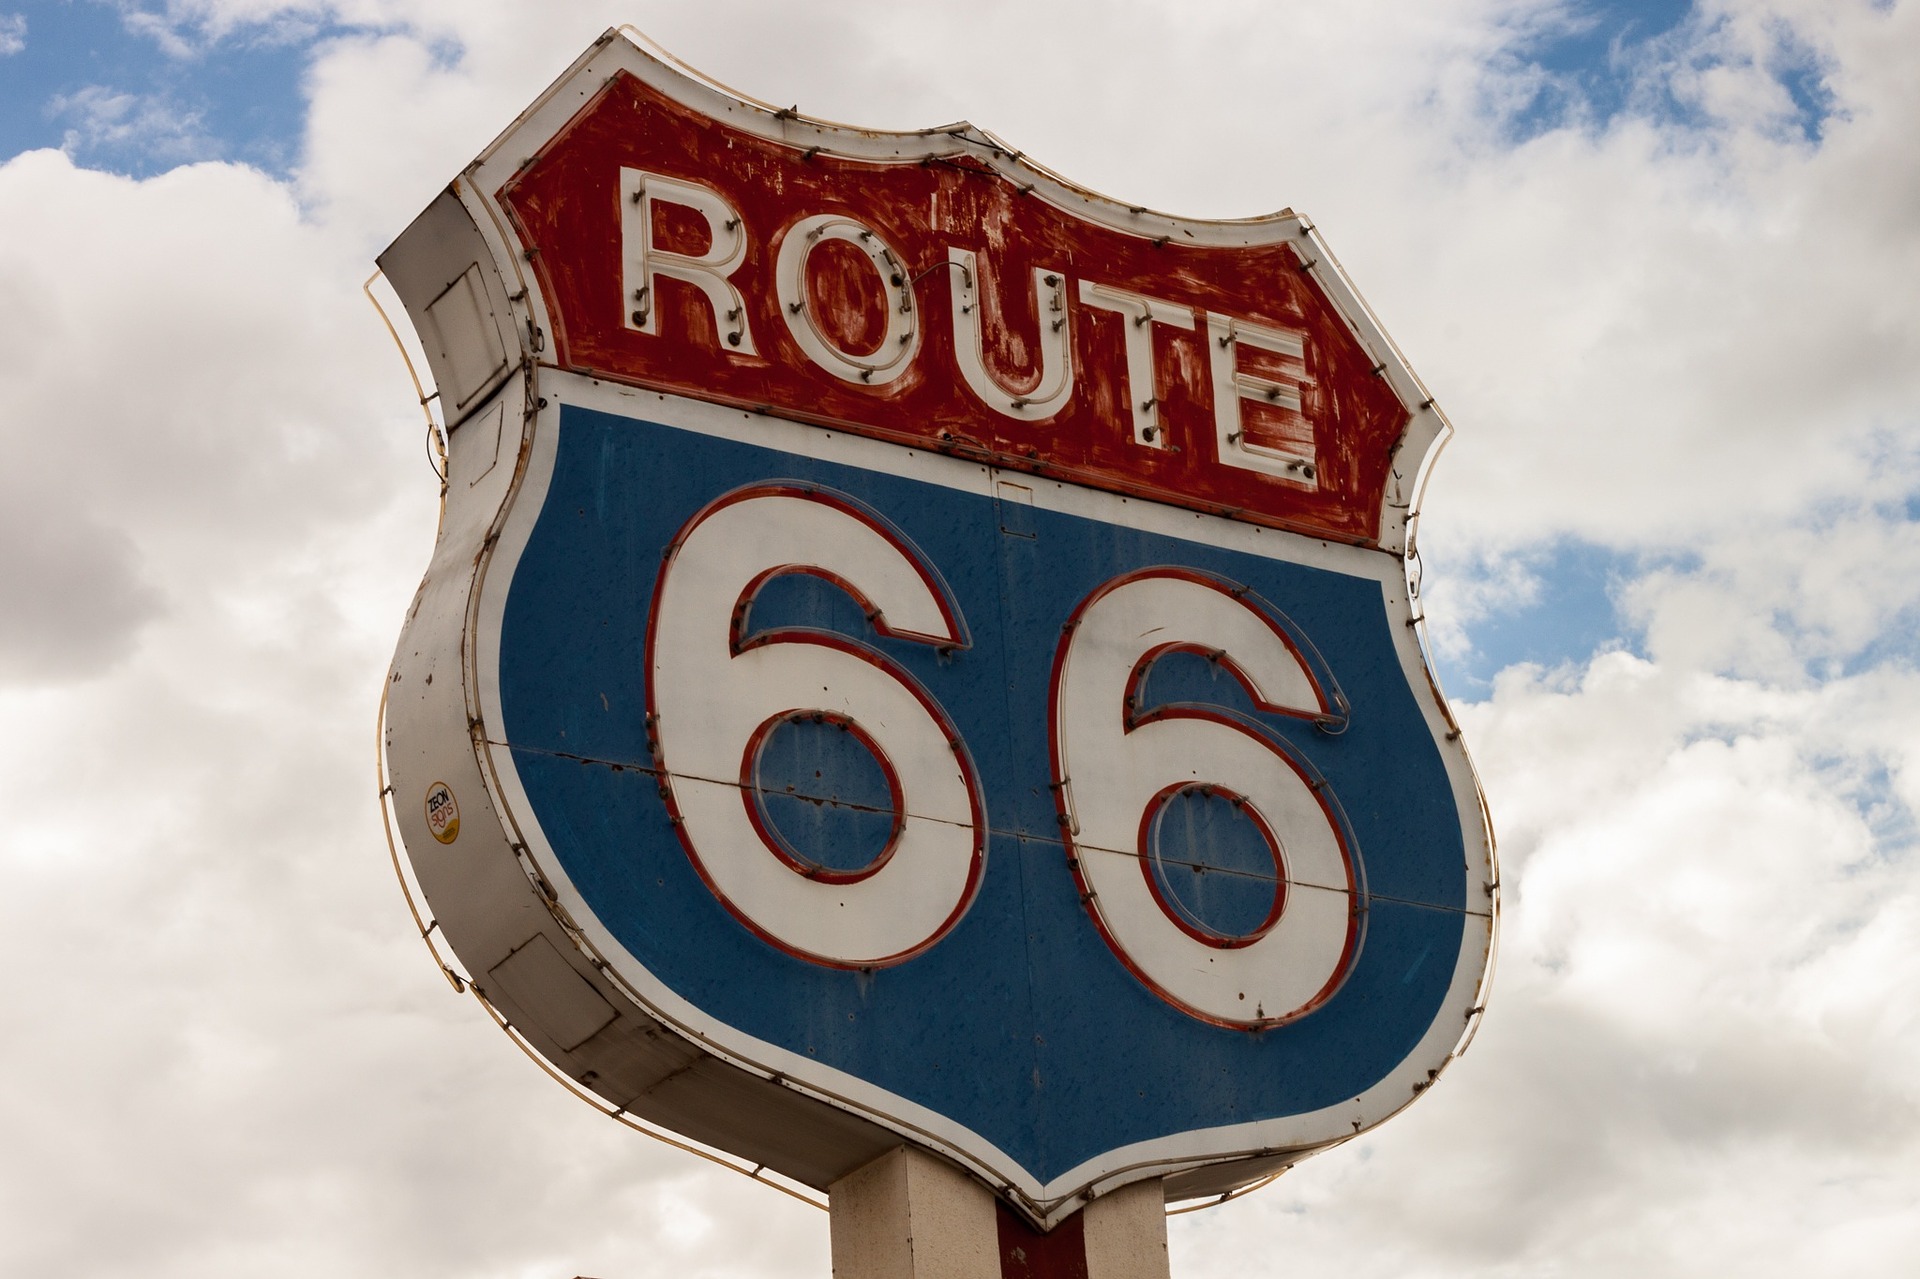 route-66